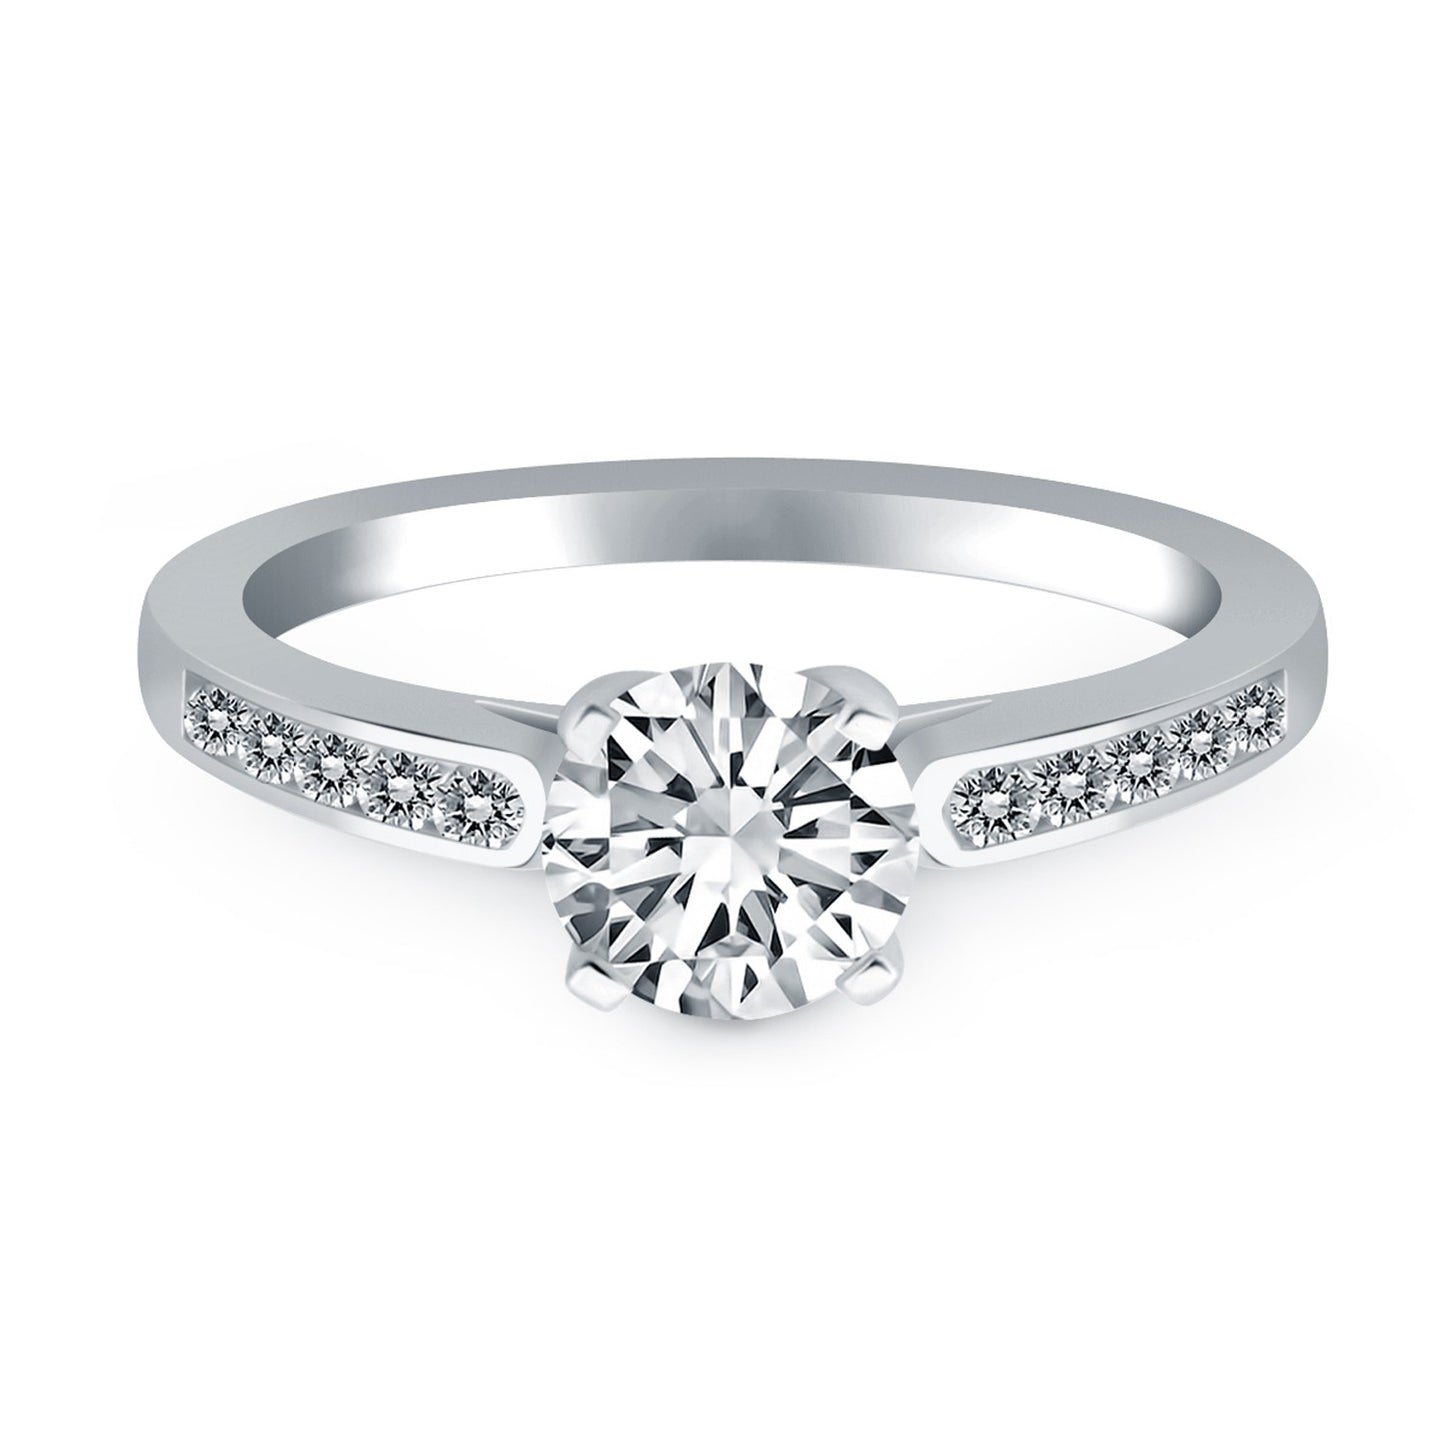 14k White Gold Diamond Channel Cathedral Engagement Ring